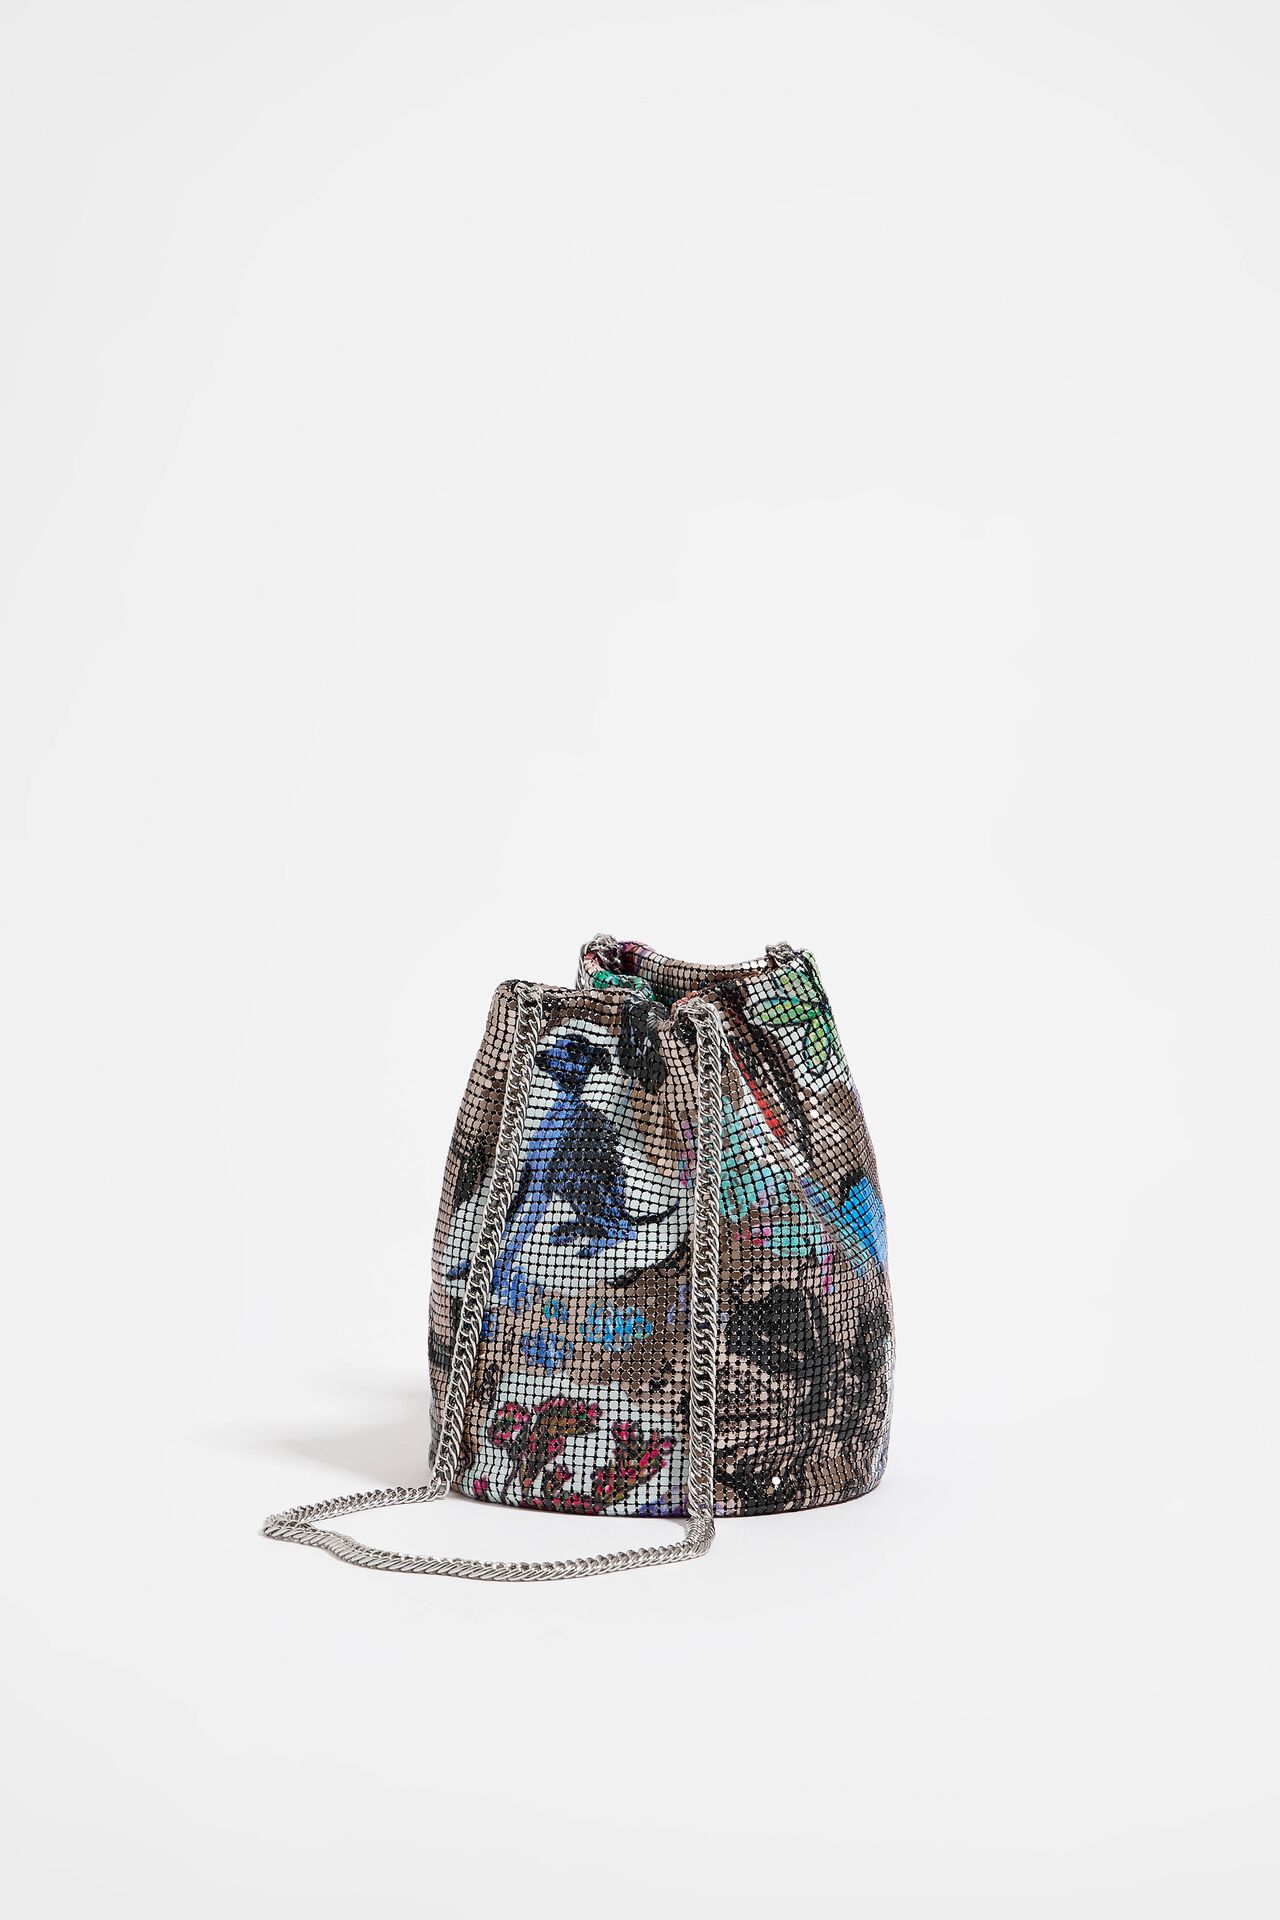 BB-01 Black and White Bucket Bag – The Enriched Stitch